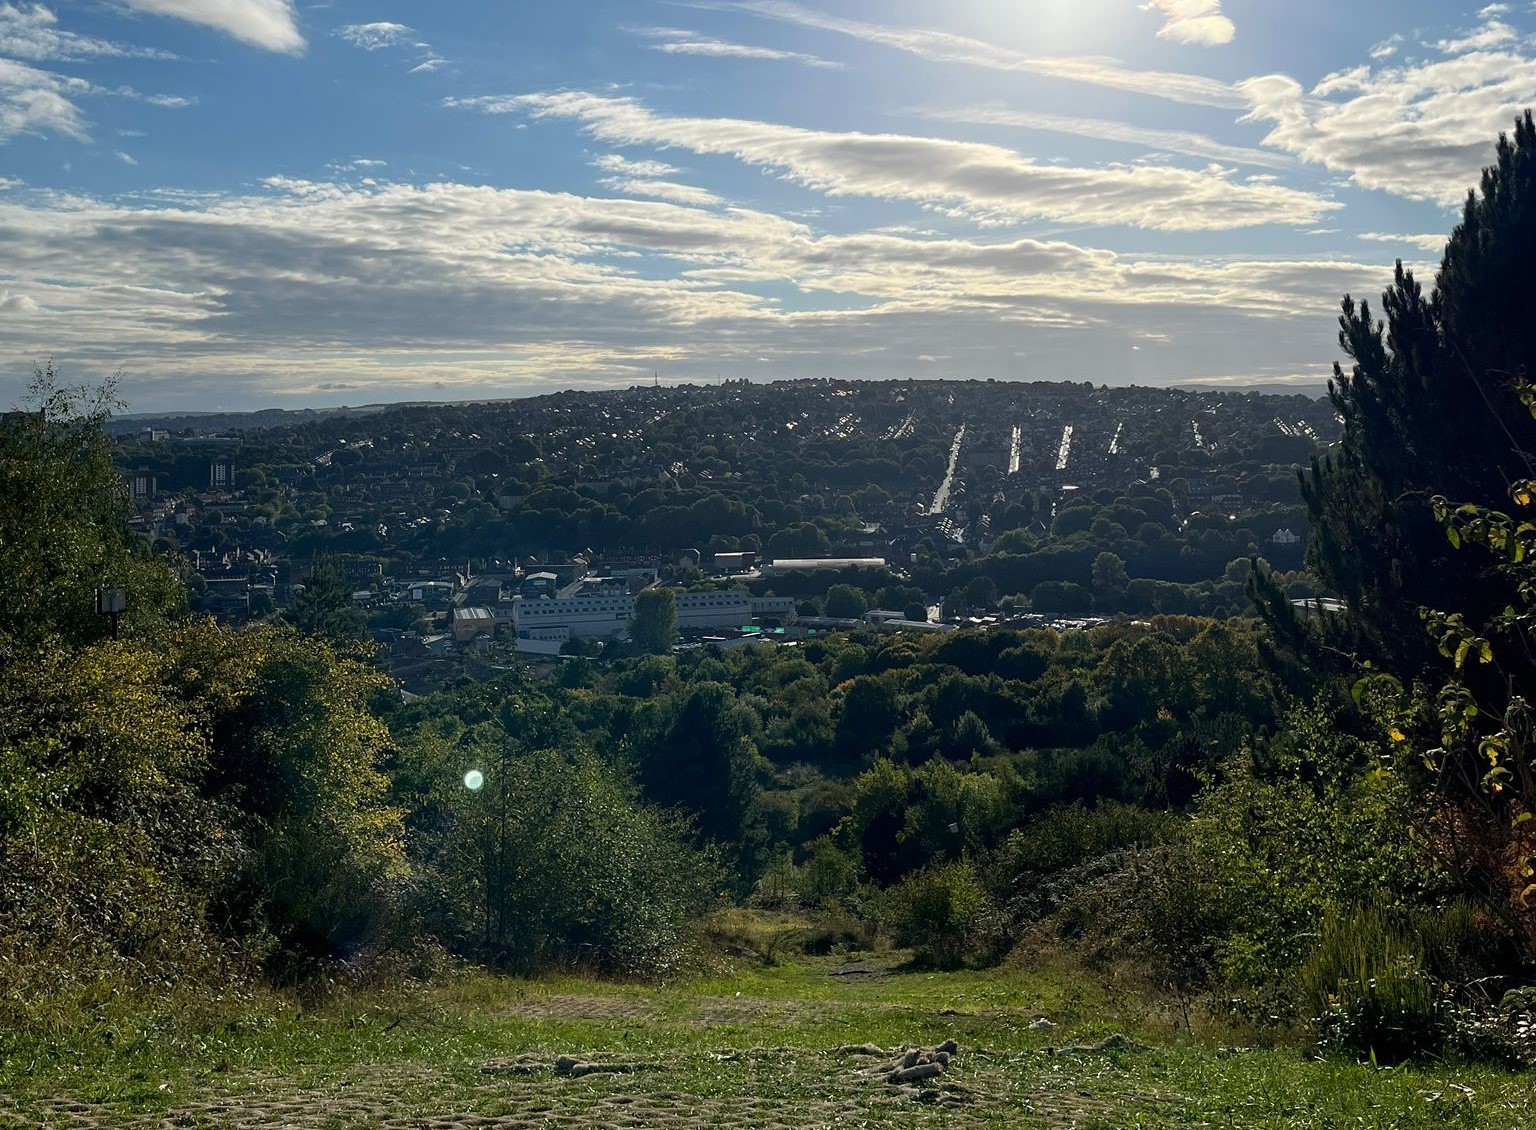 A view of Sheffield from the top of the former Ski Slope at Parkwood Springs